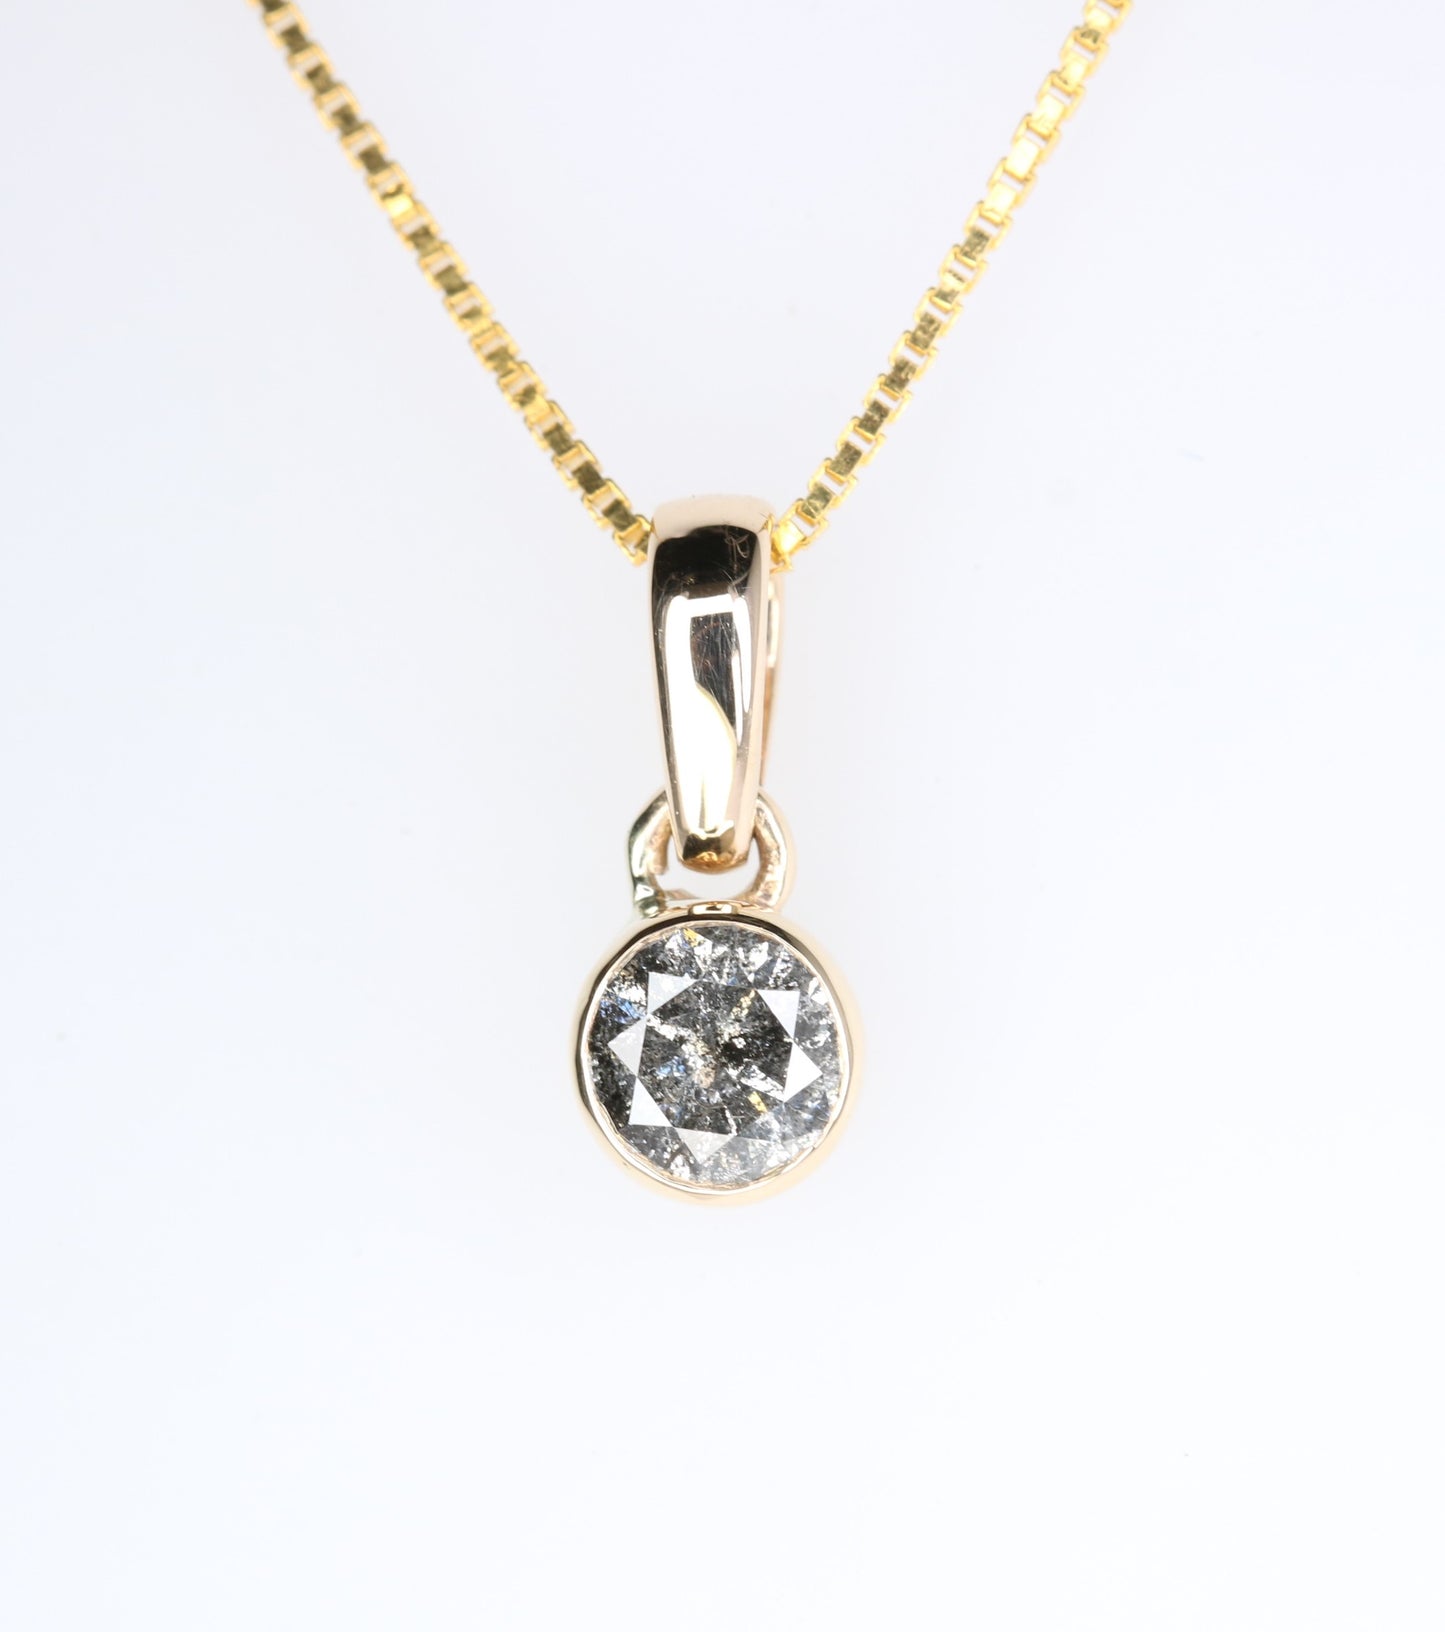 Loose Salt And Pepper Diamond Pendant Bezel Setting With 10K Gold Chain Necklace Gift For Her